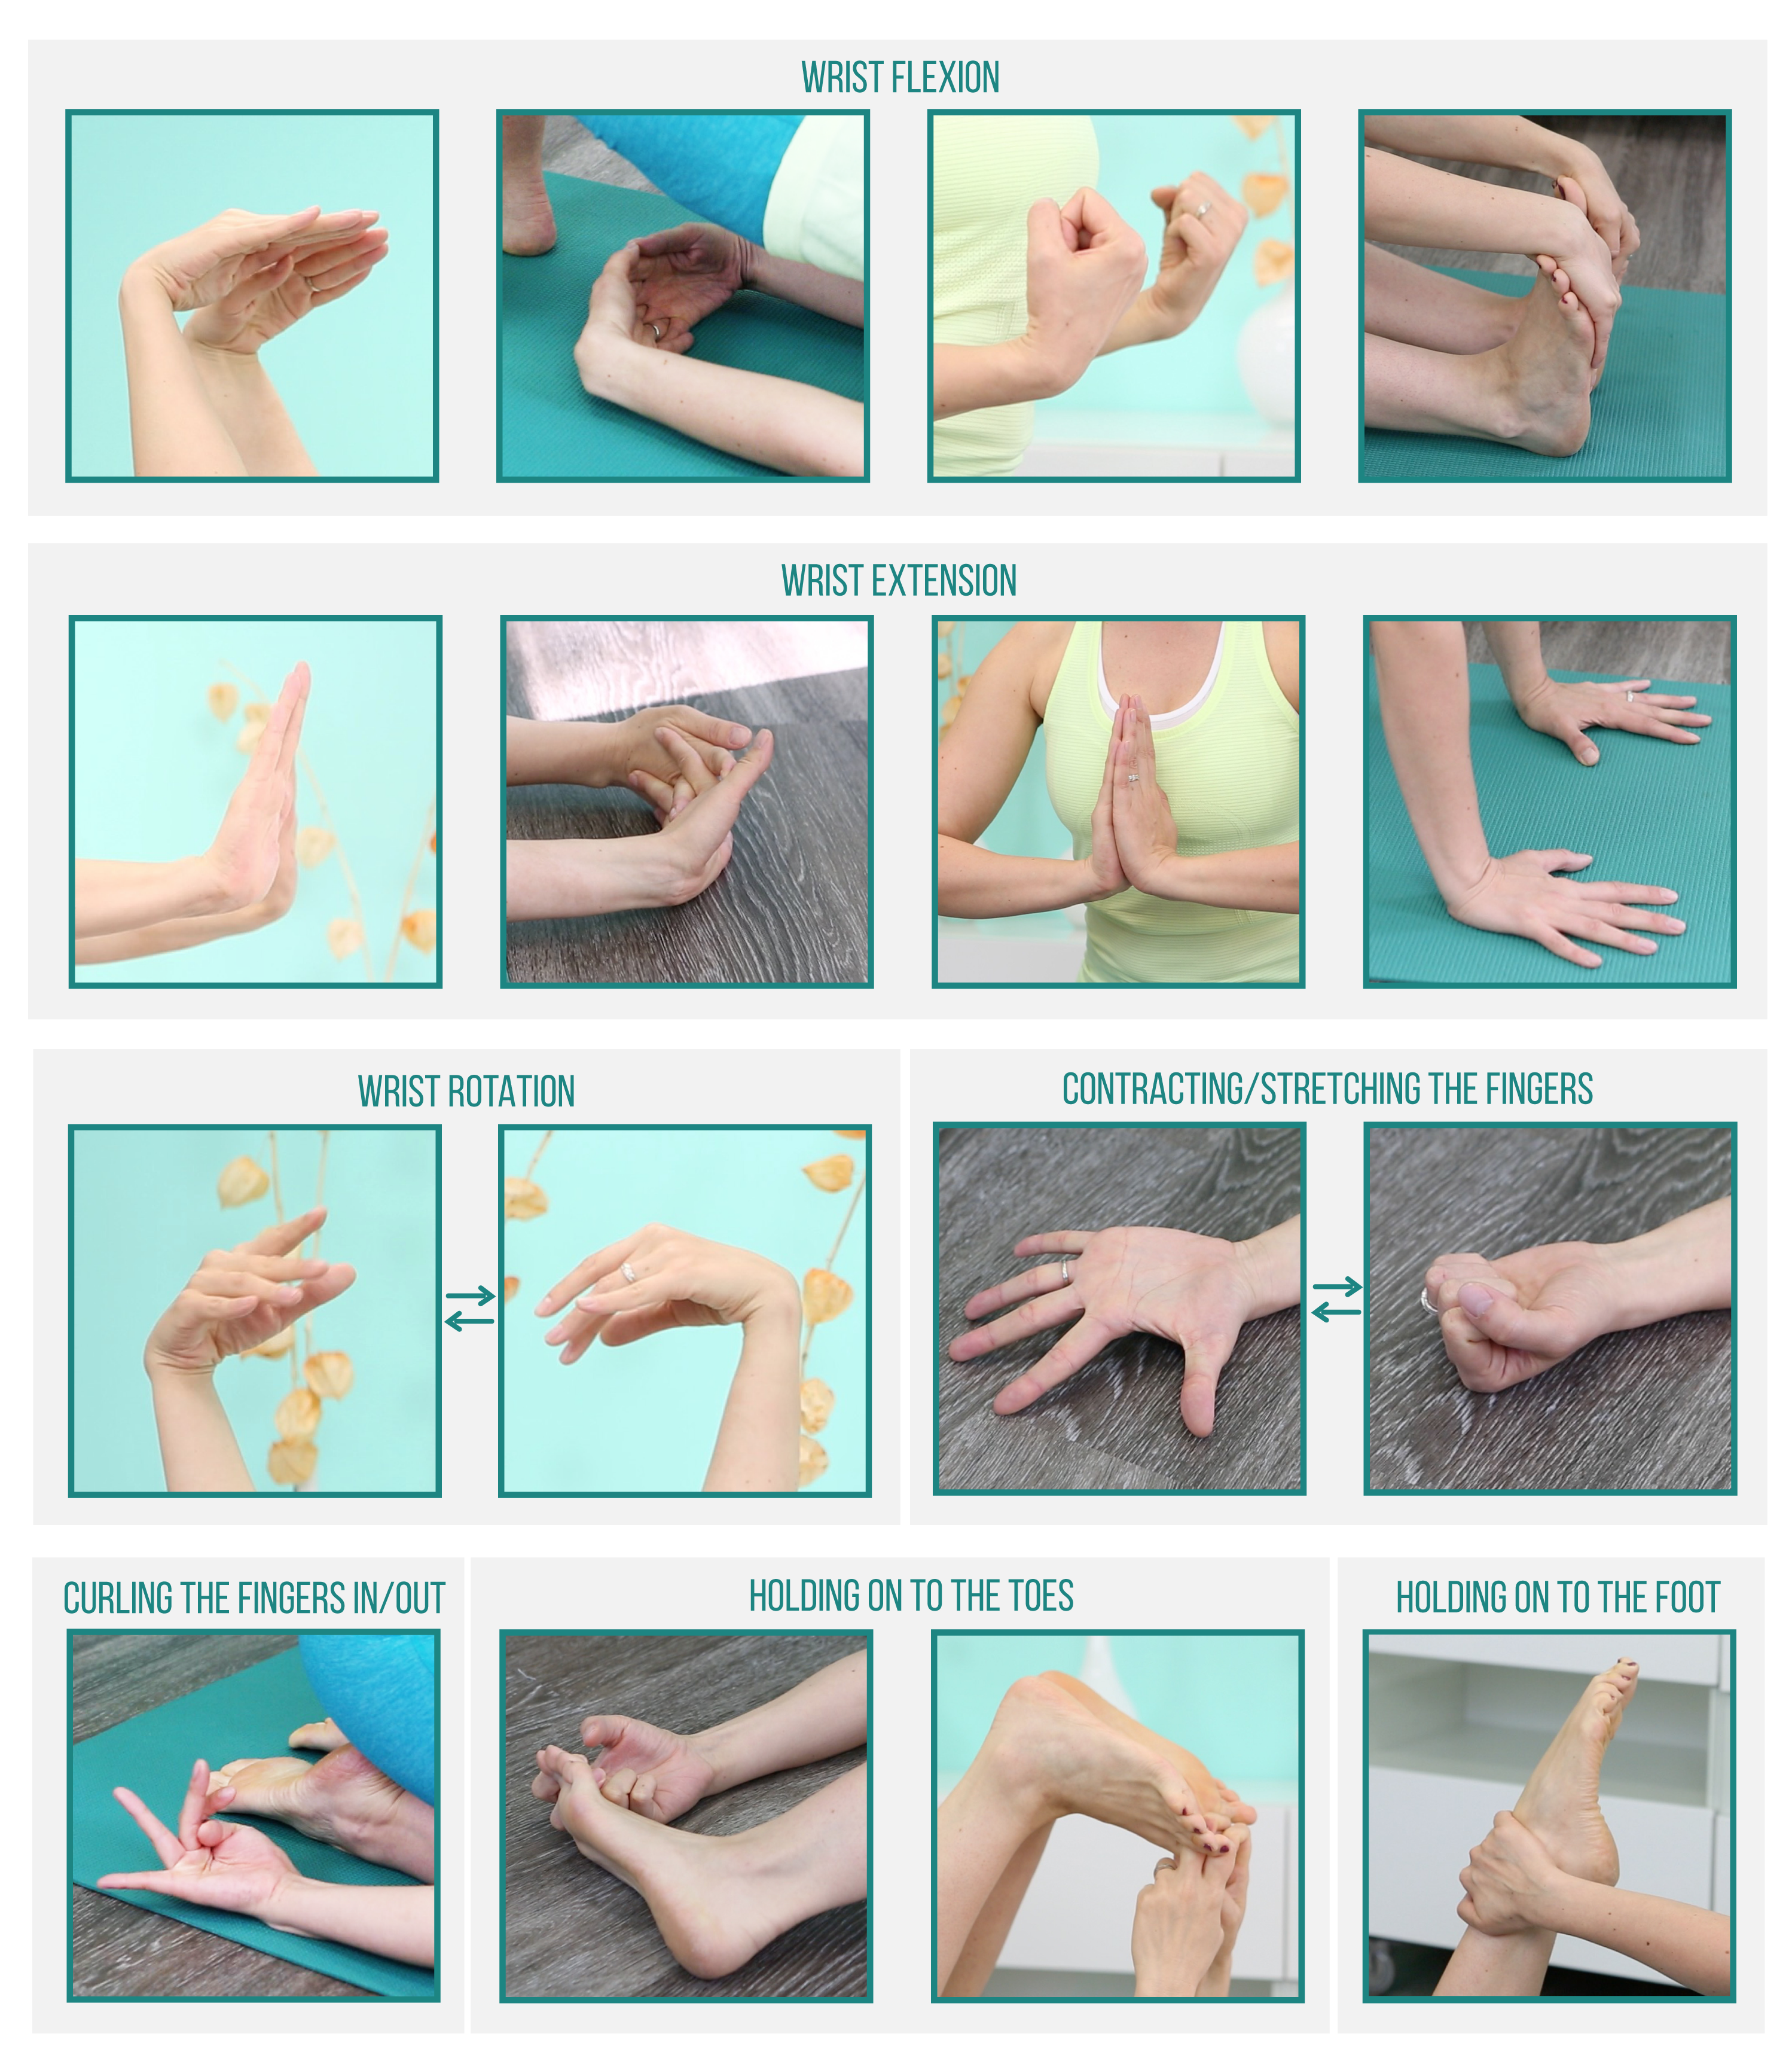 Yoga for wrist health: 4 easy exercises for strong and flexible wrists